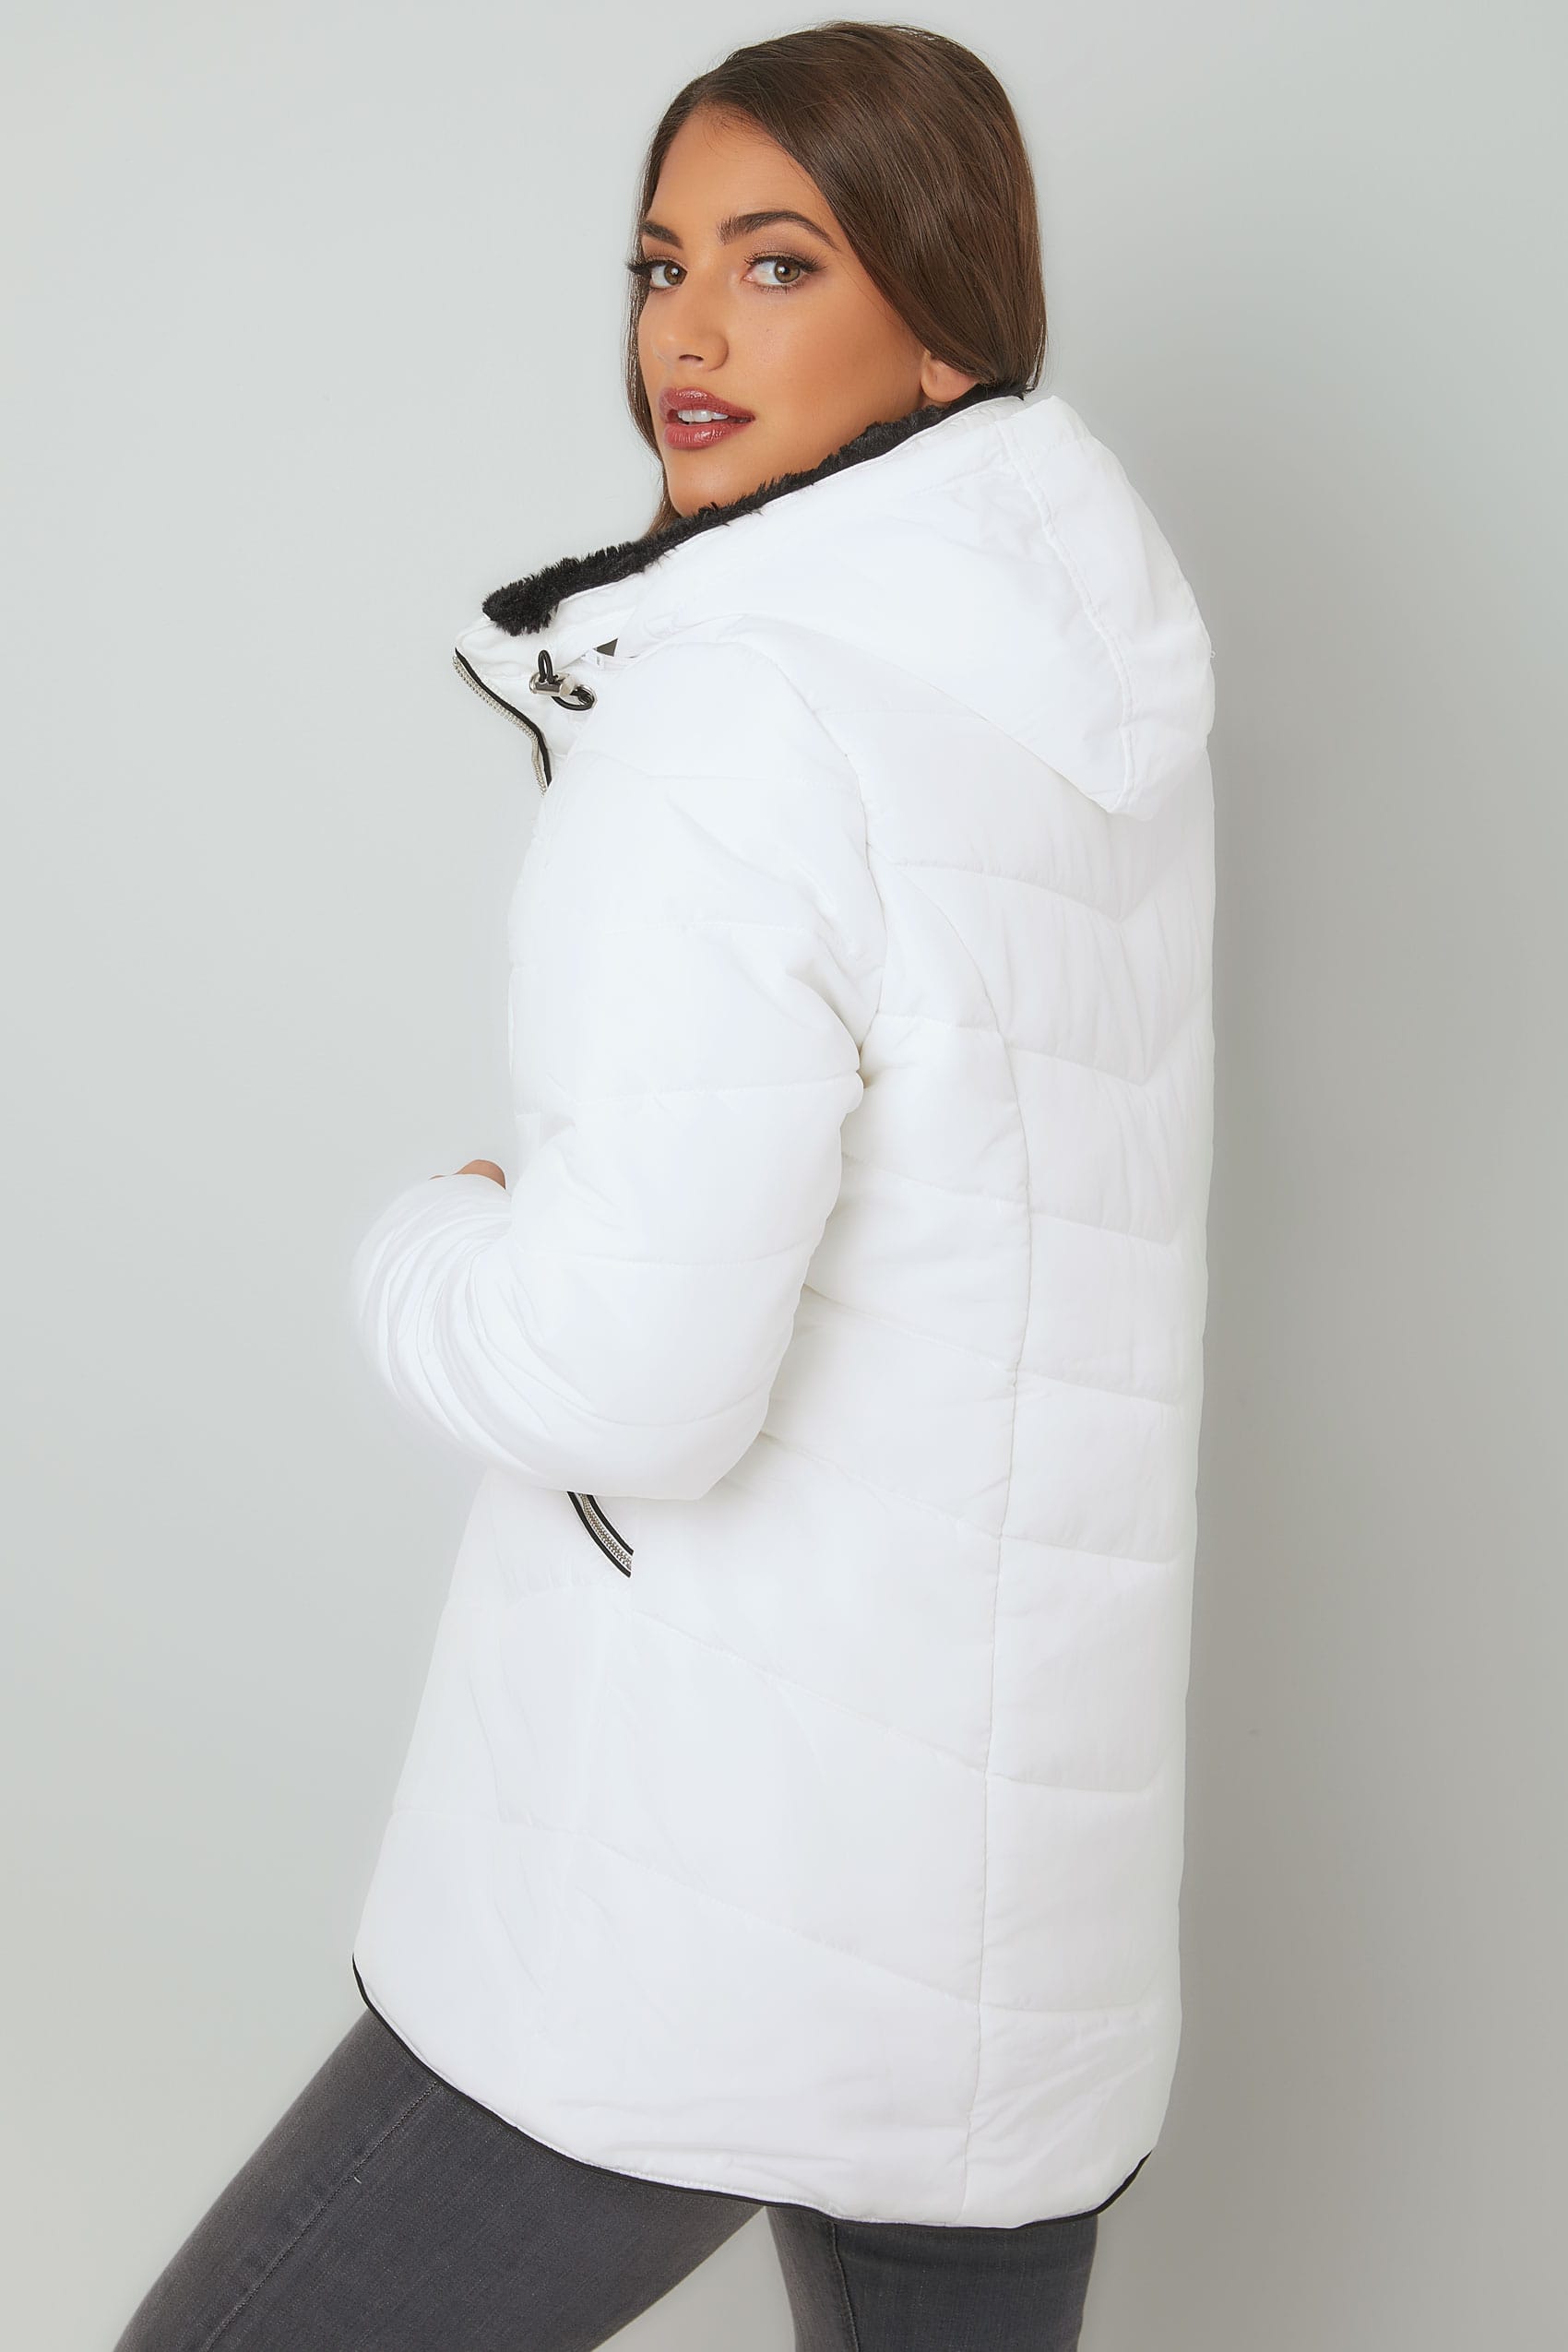 White Short Quilted Puffer Jacket With Foldaway Hood, Plus size 16 to 32